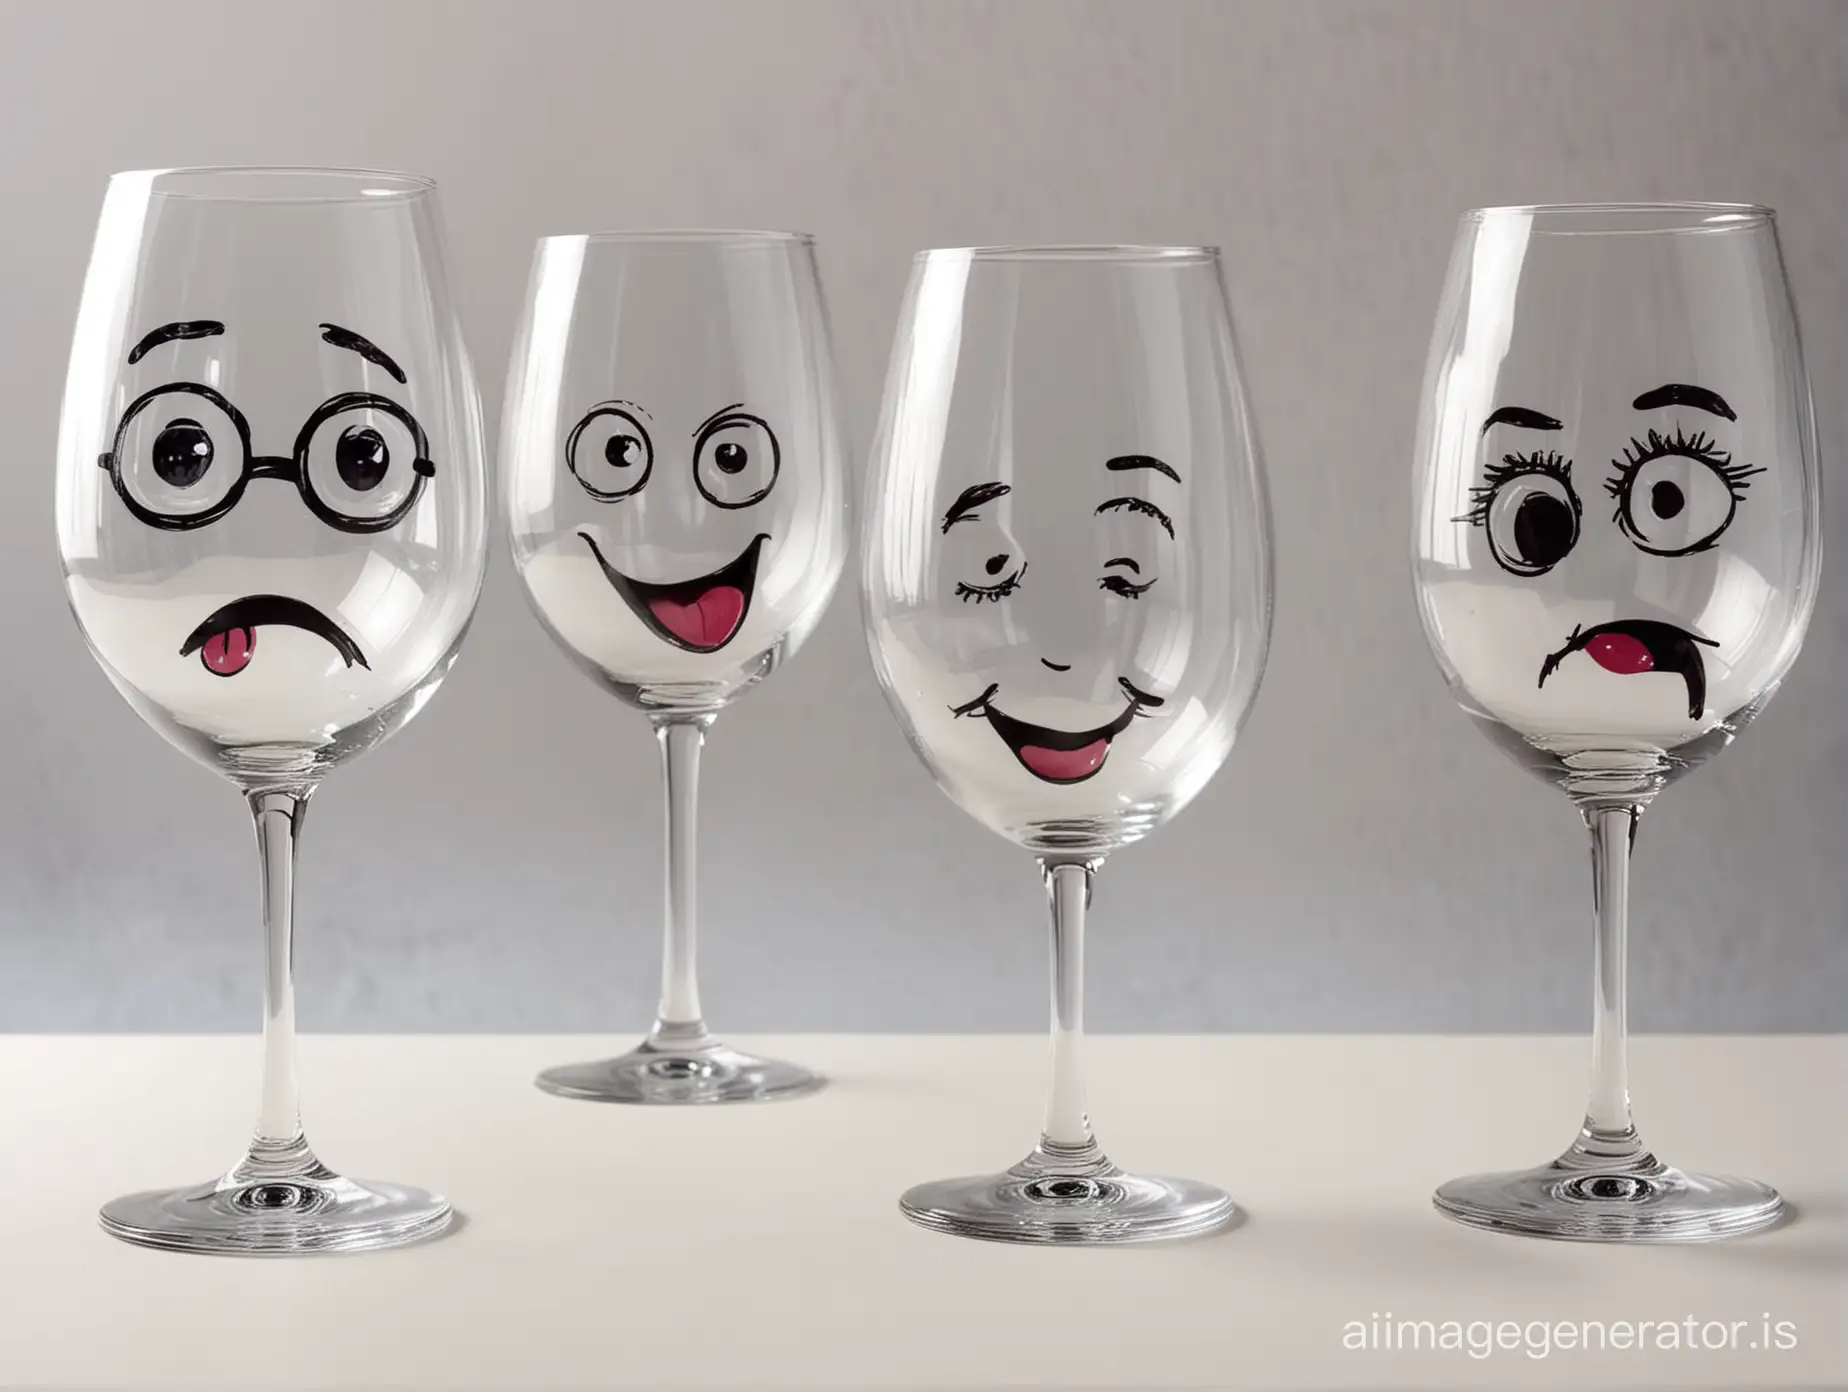 wineglasses with funny faces